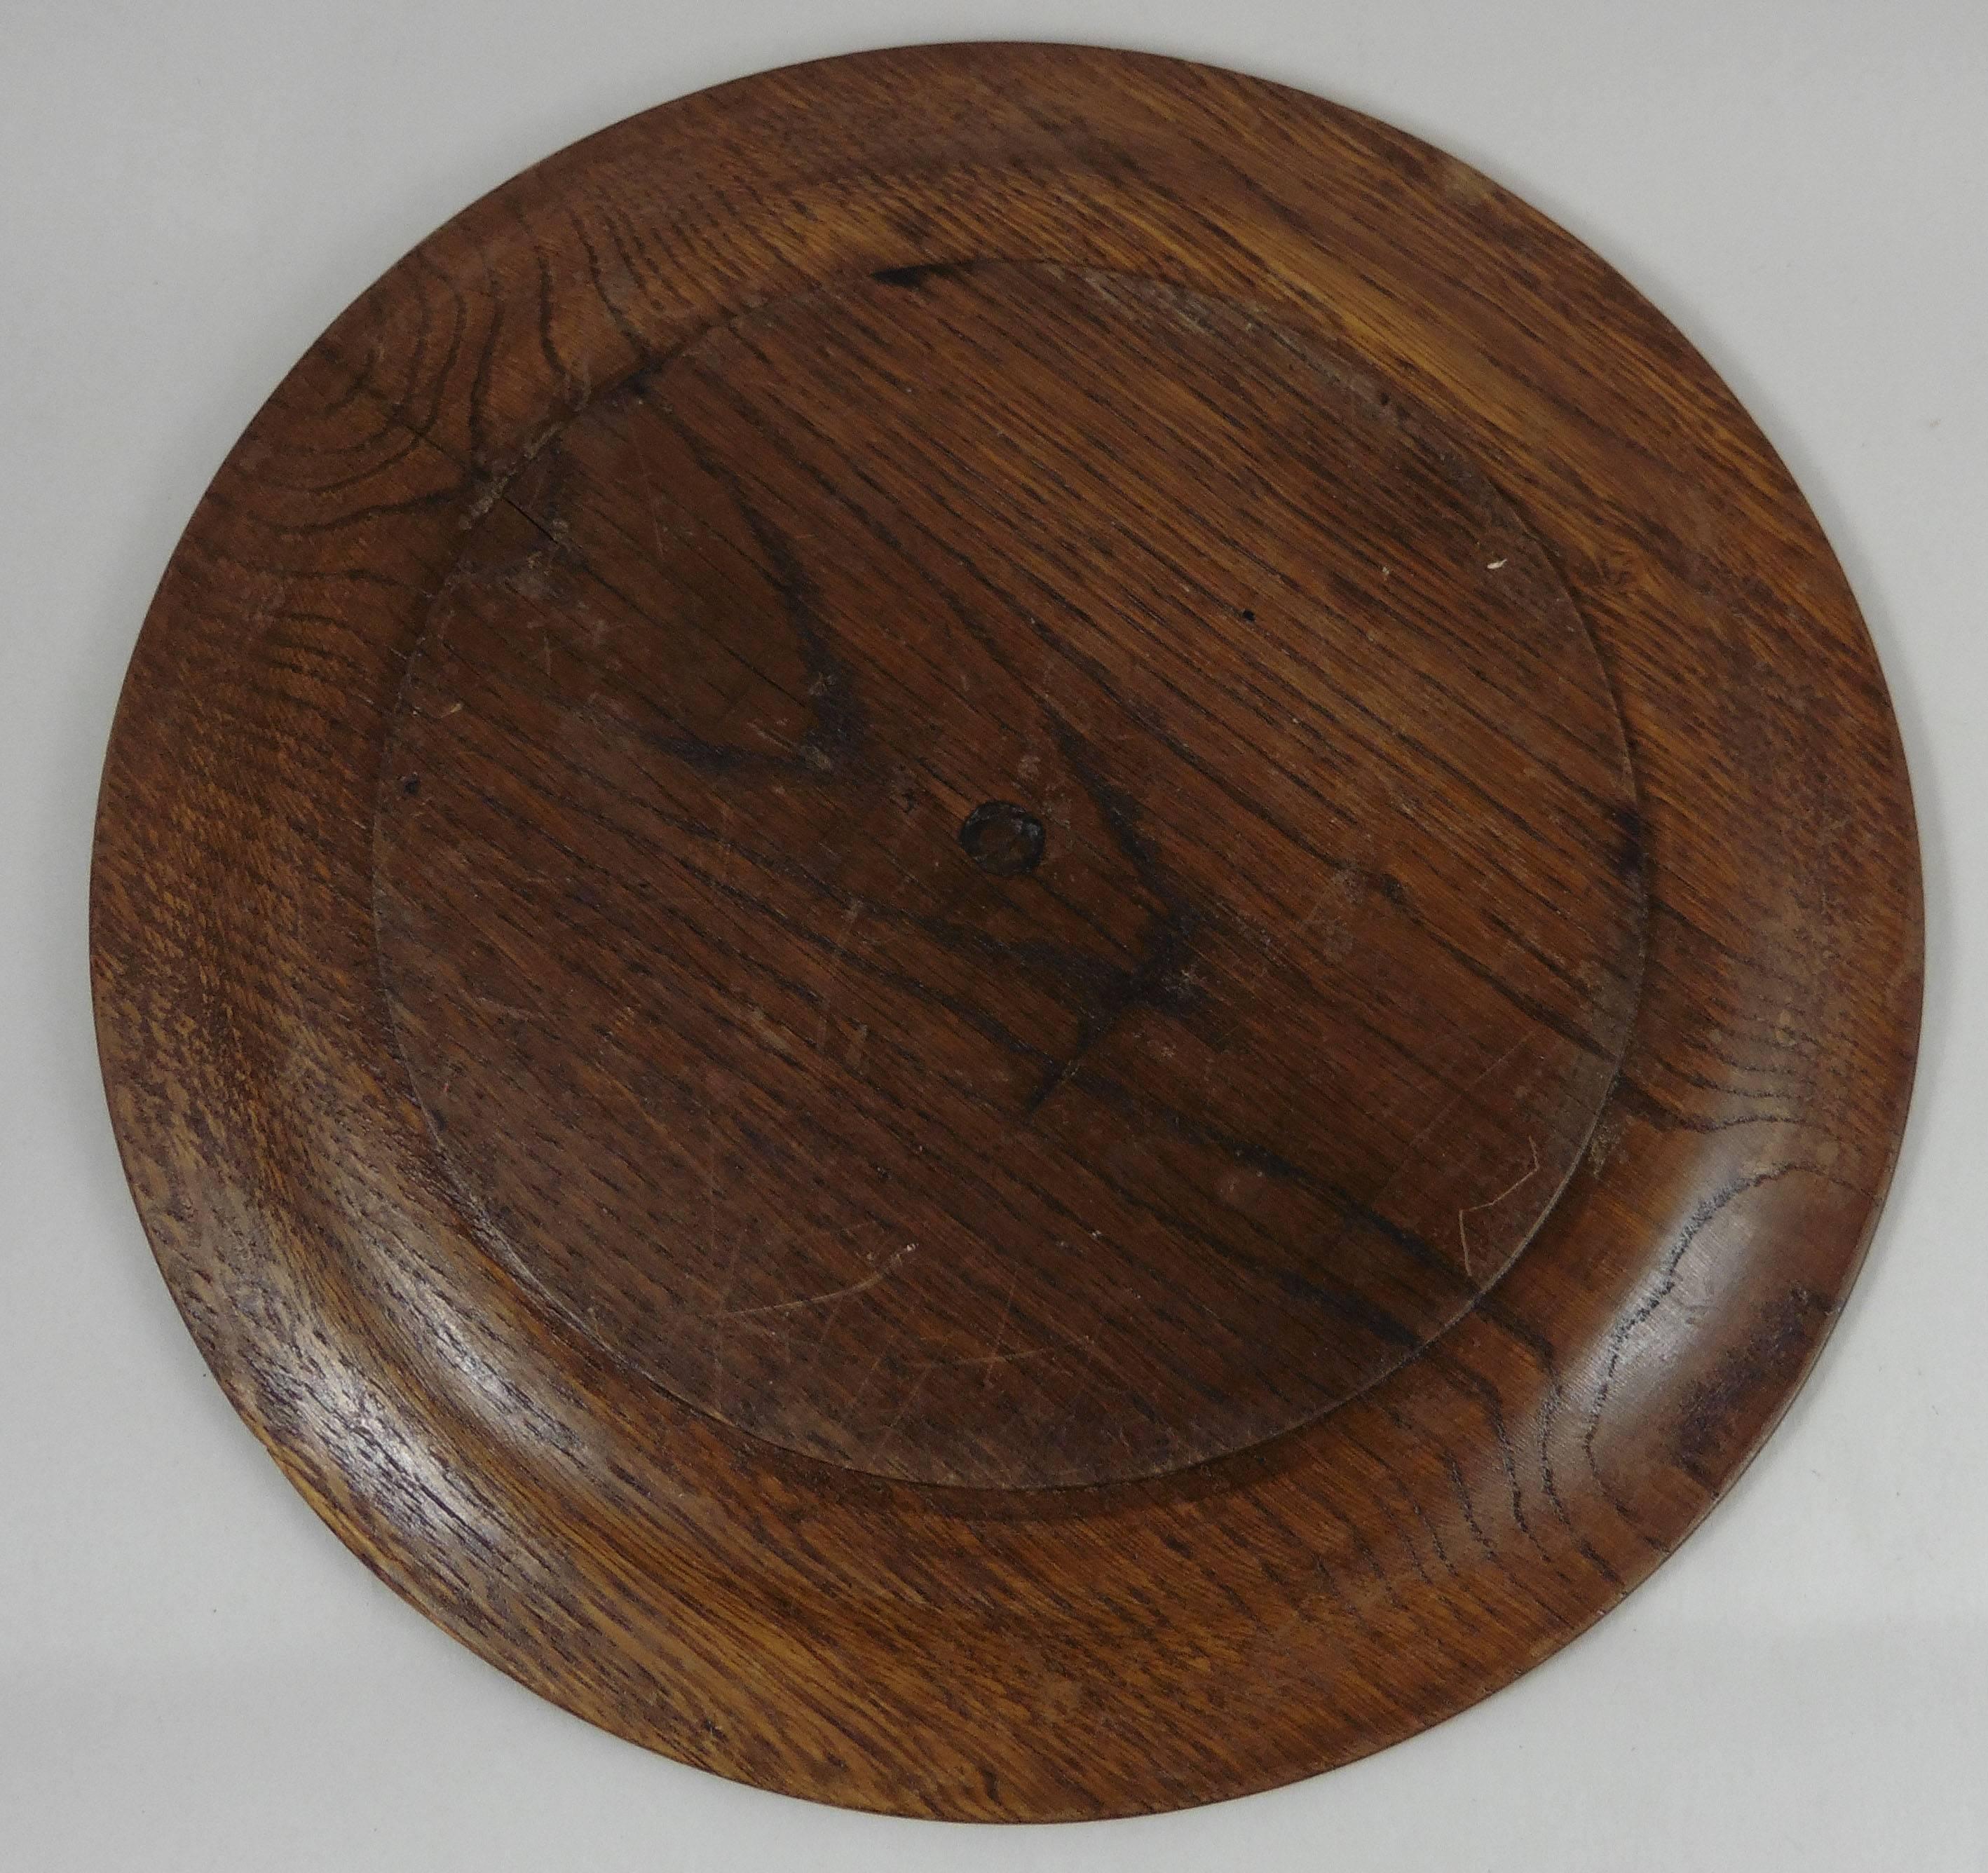 French round wood bread platter 